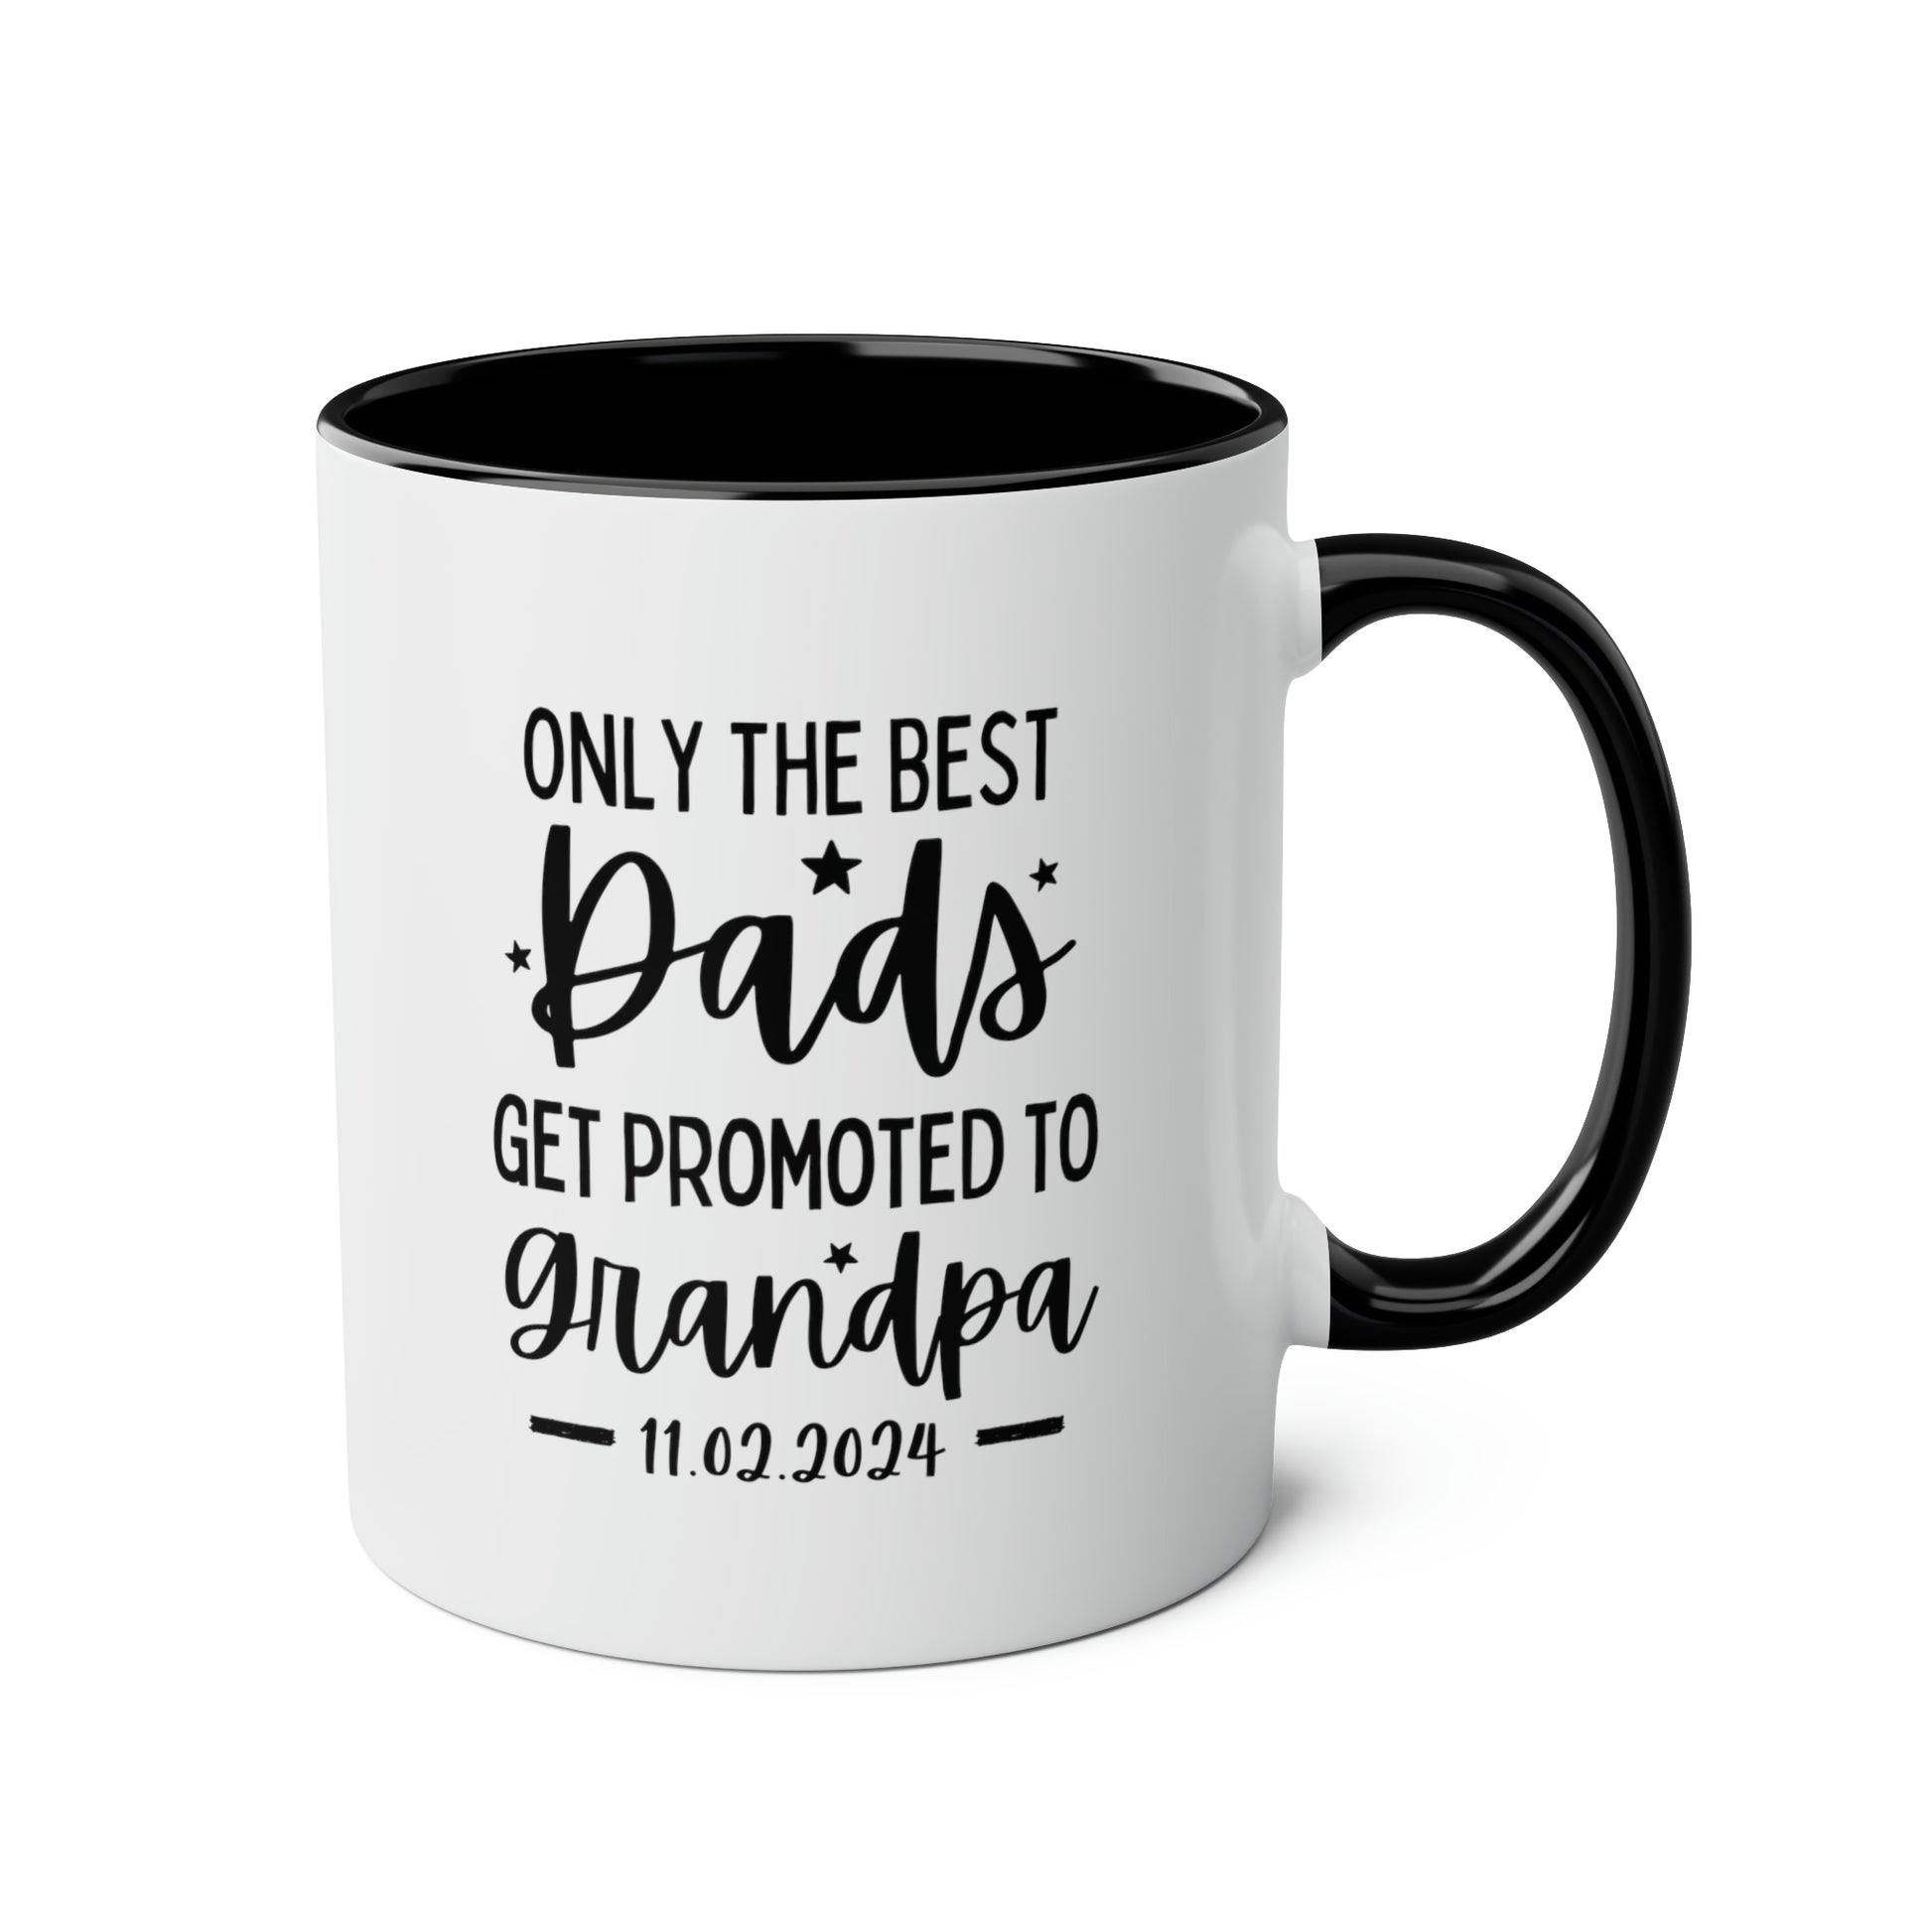 Only The Best Dads Get Promoted To Grandpa 11oz white with black accent funny large coffee mug gift for granddad grandfather grandpa birthday christmas men fathers day waveywares wavey wares wavywares wavy wares